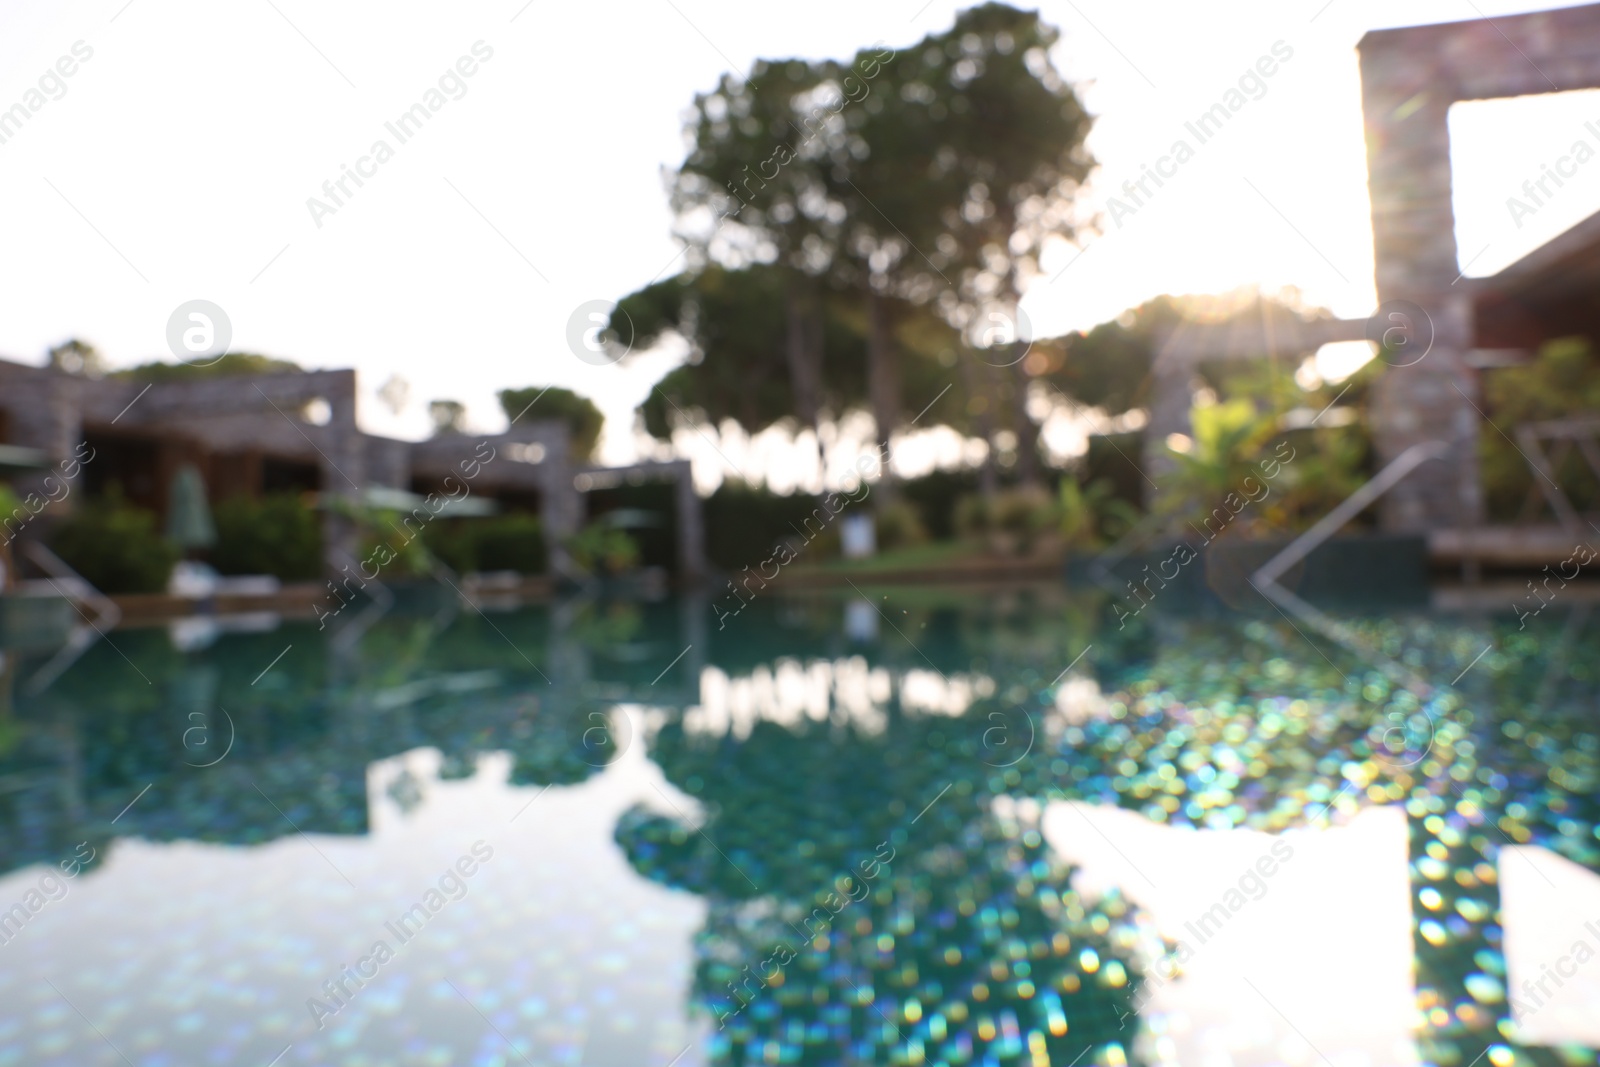 Photo of Outdoor swimming pool at resort, blurred view